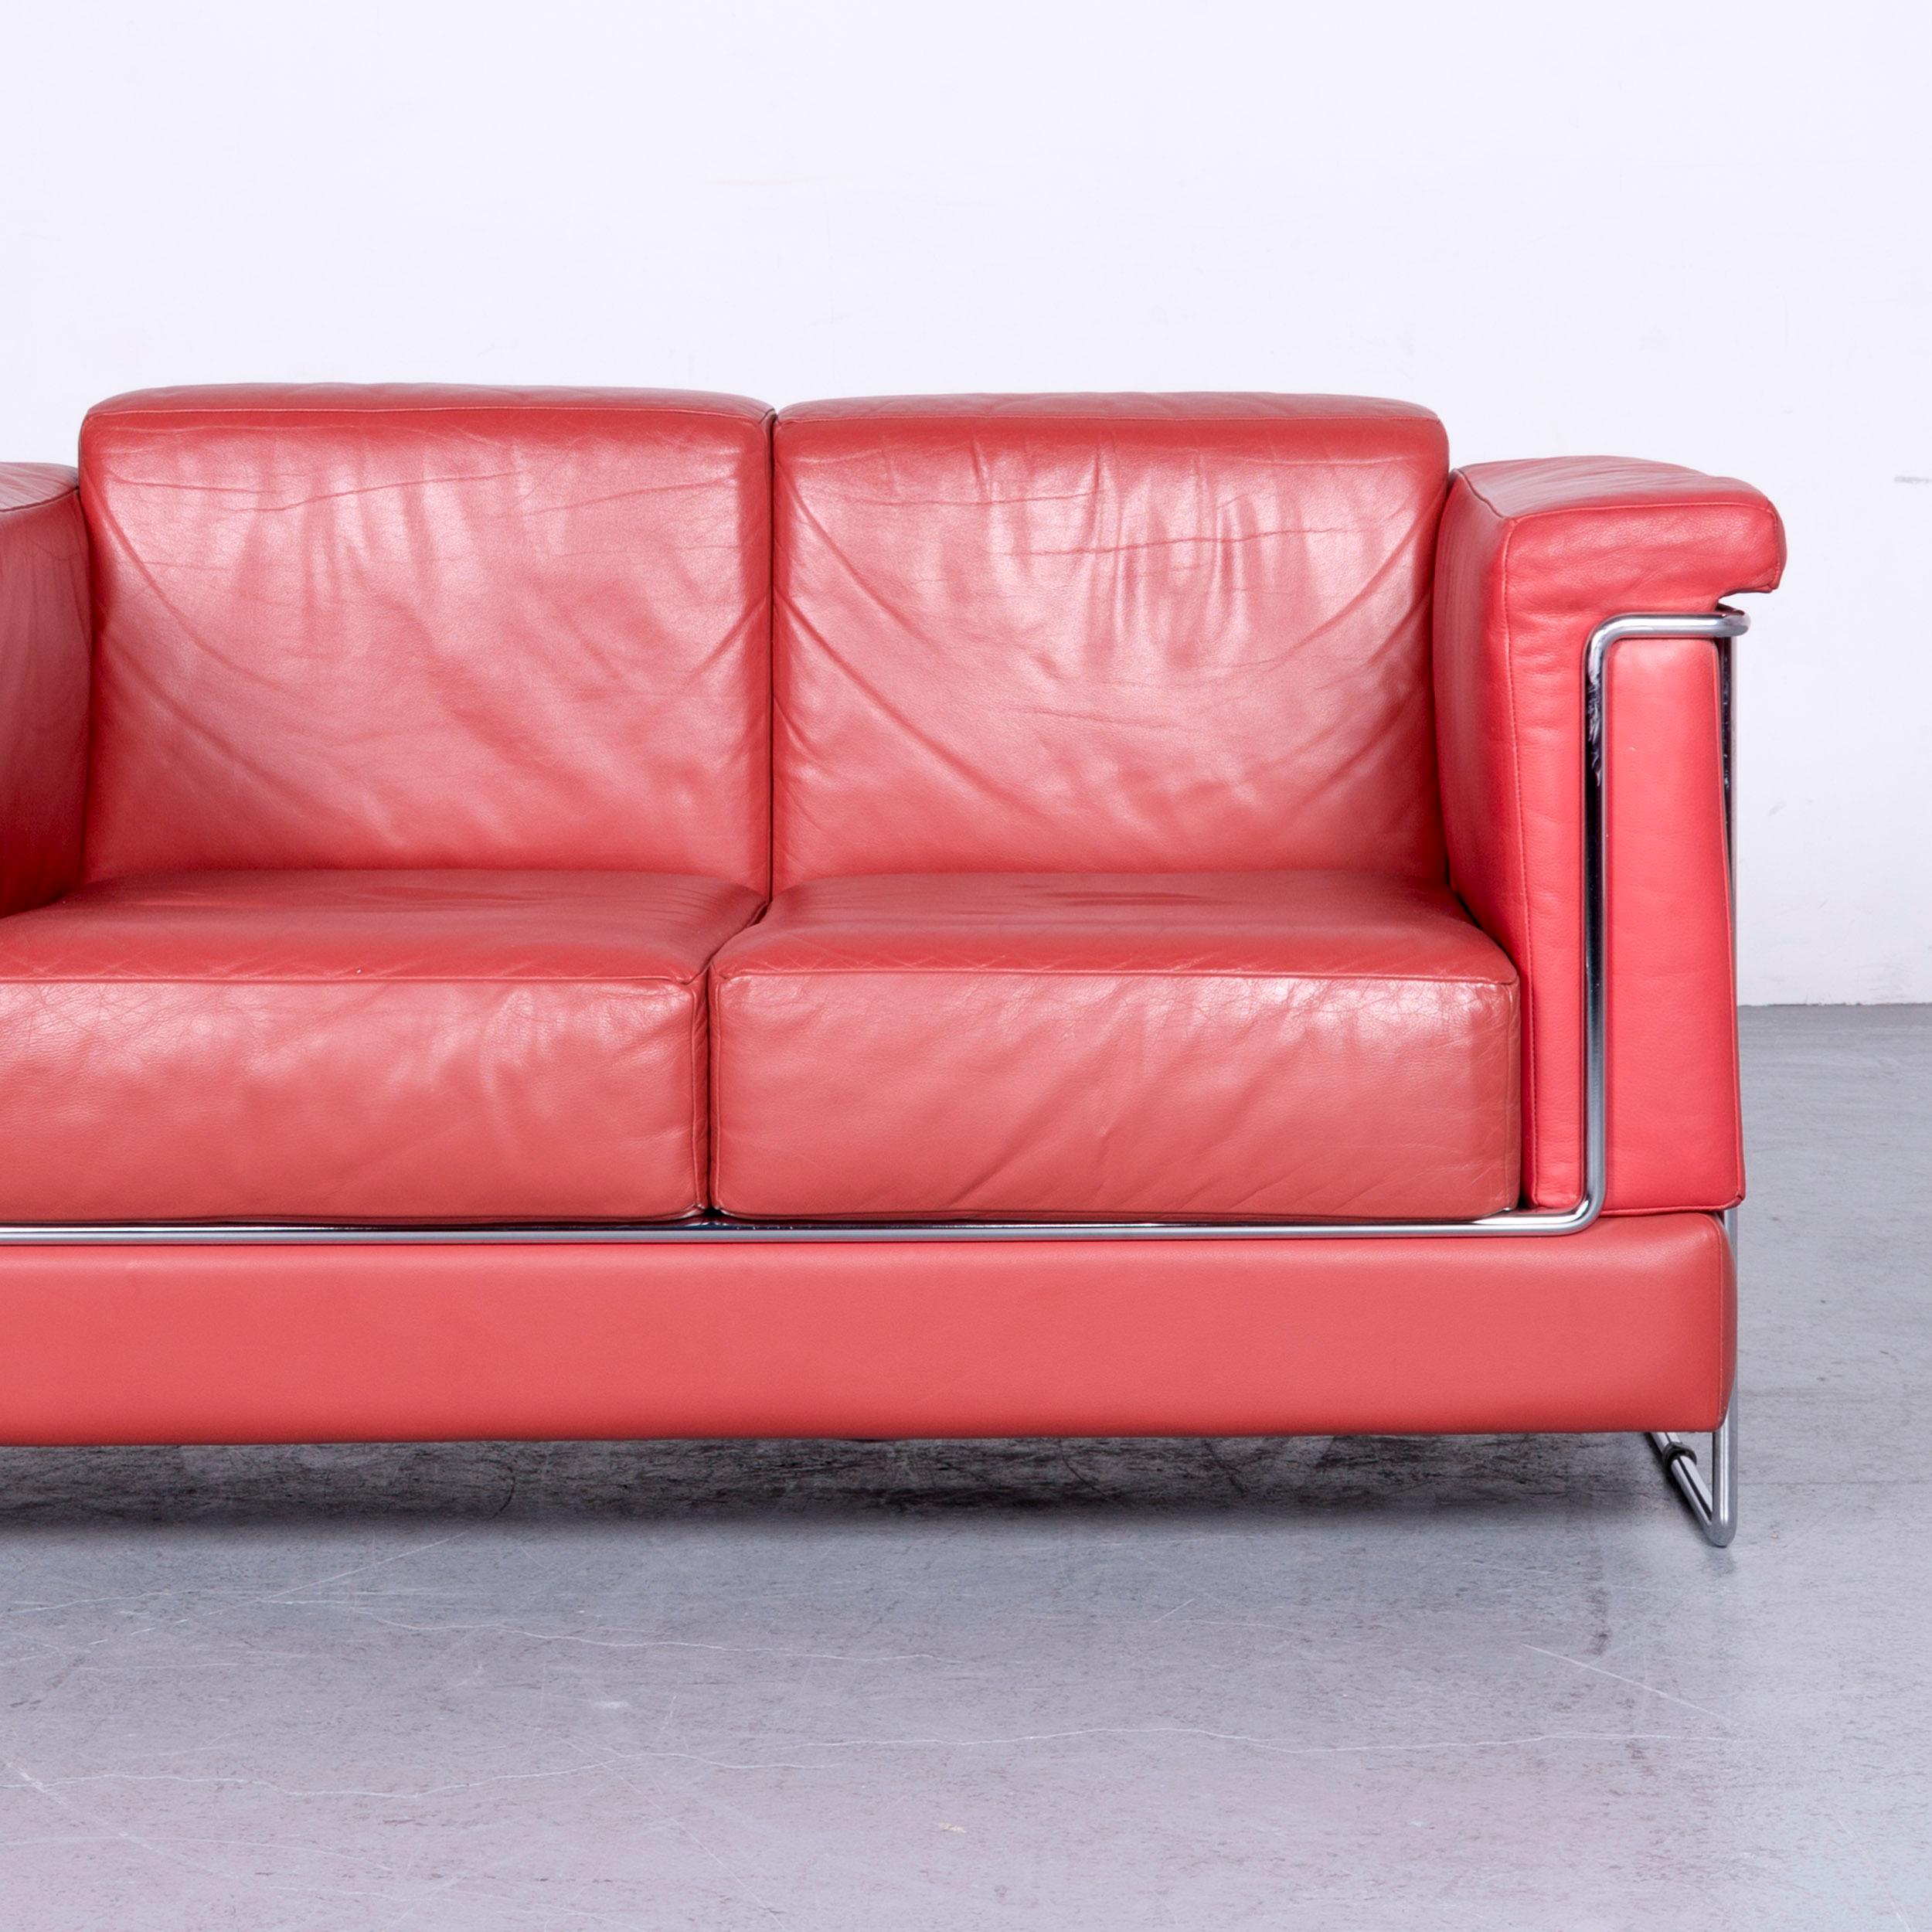 Contemporary Züco Carat Designer Leather Sofa Set Red Two-Seat Couch